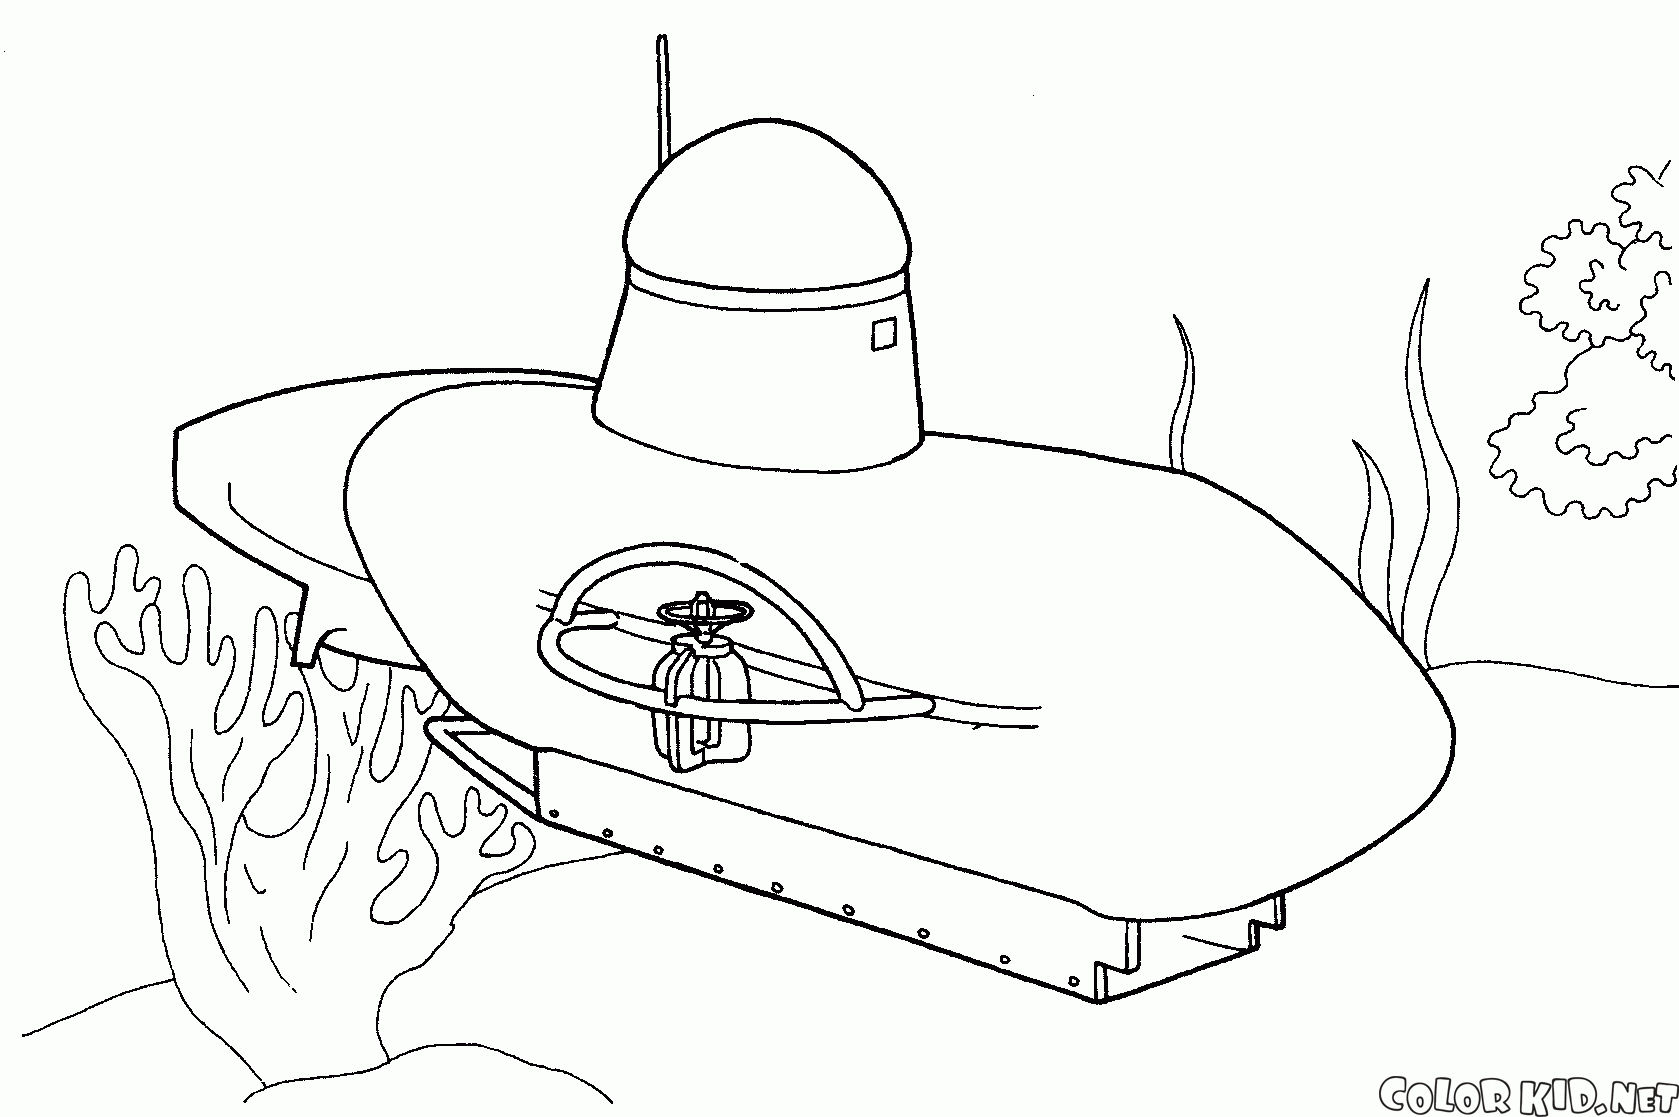 Coloring page - Submarine vessels